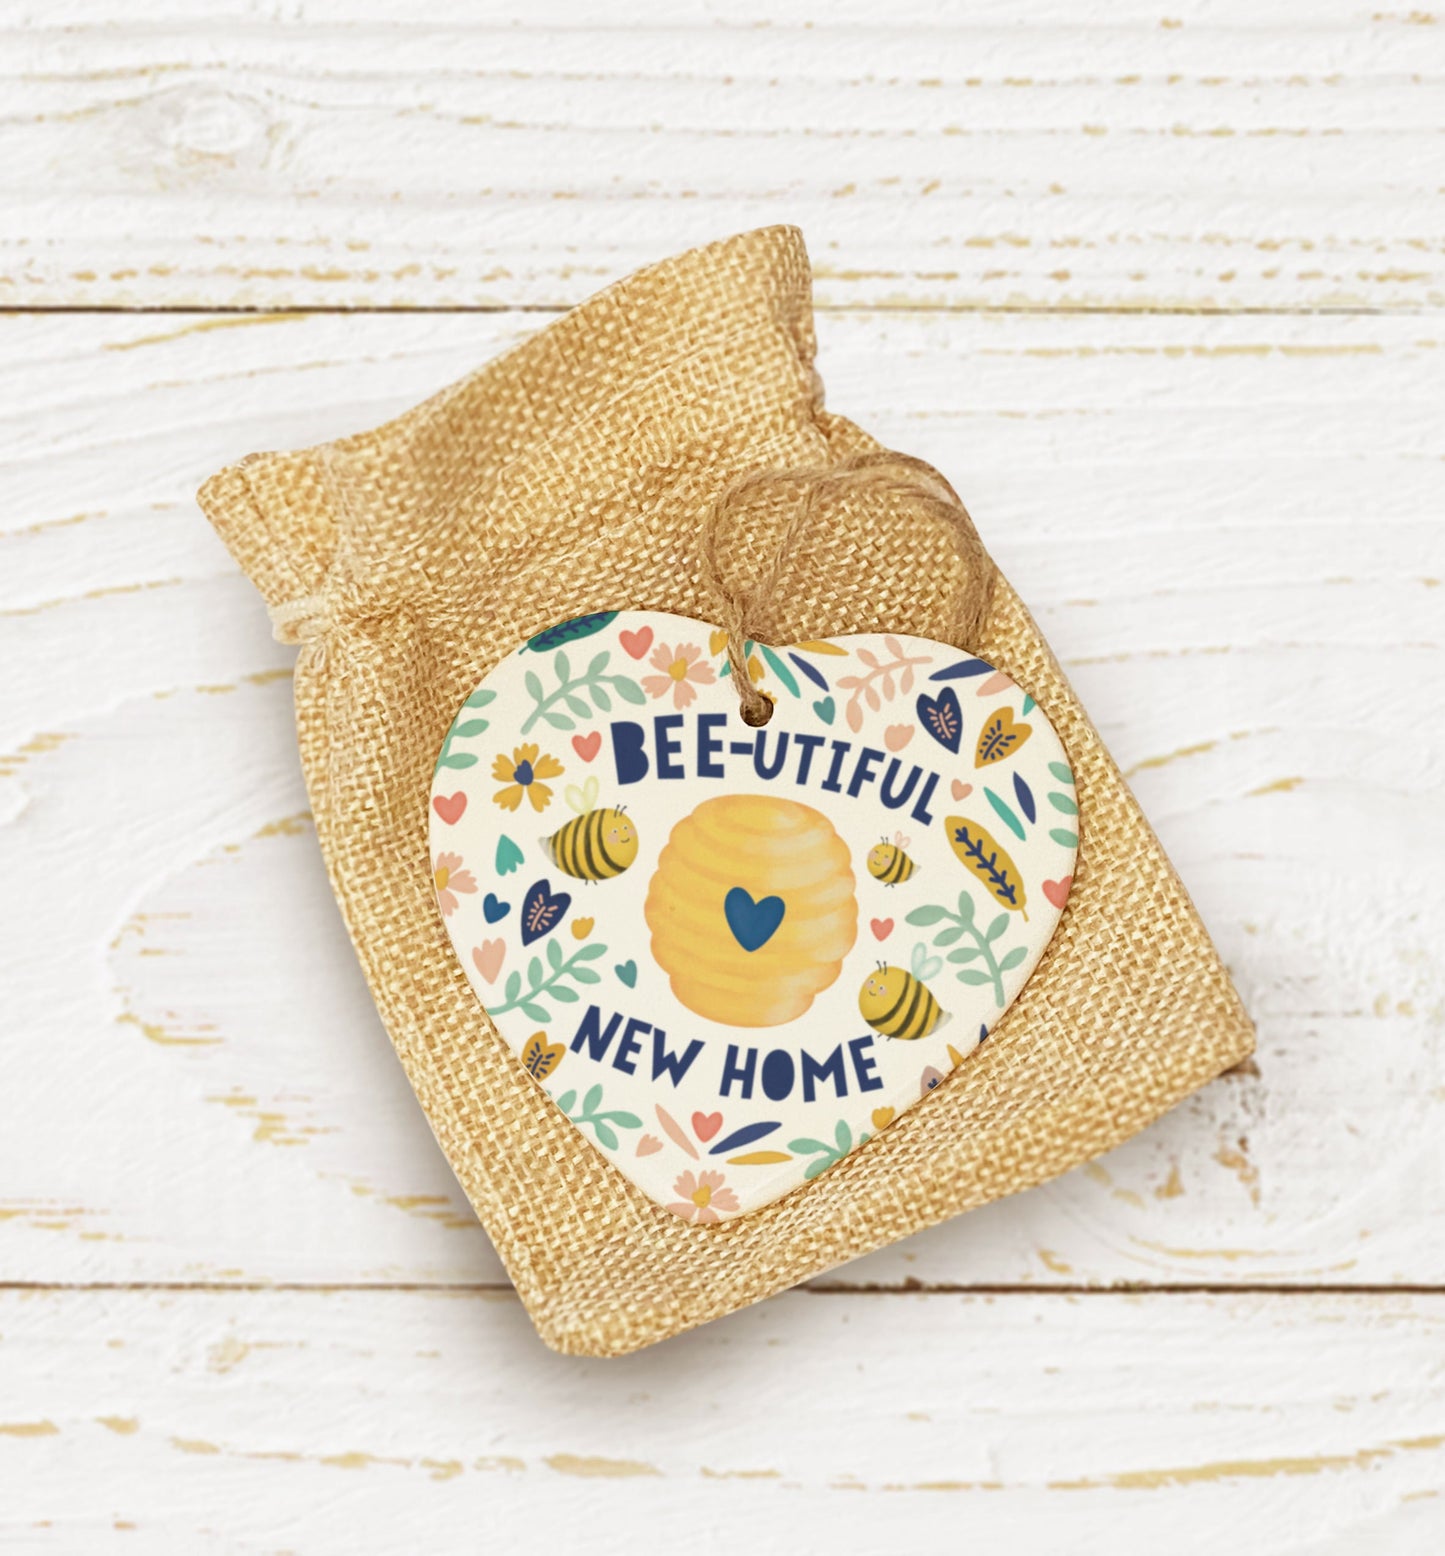 Bee-utiful New Home Hanging Heart. Cute Bee Decoration. New Home Gift. Housewarming Gift. Ceramic ornament